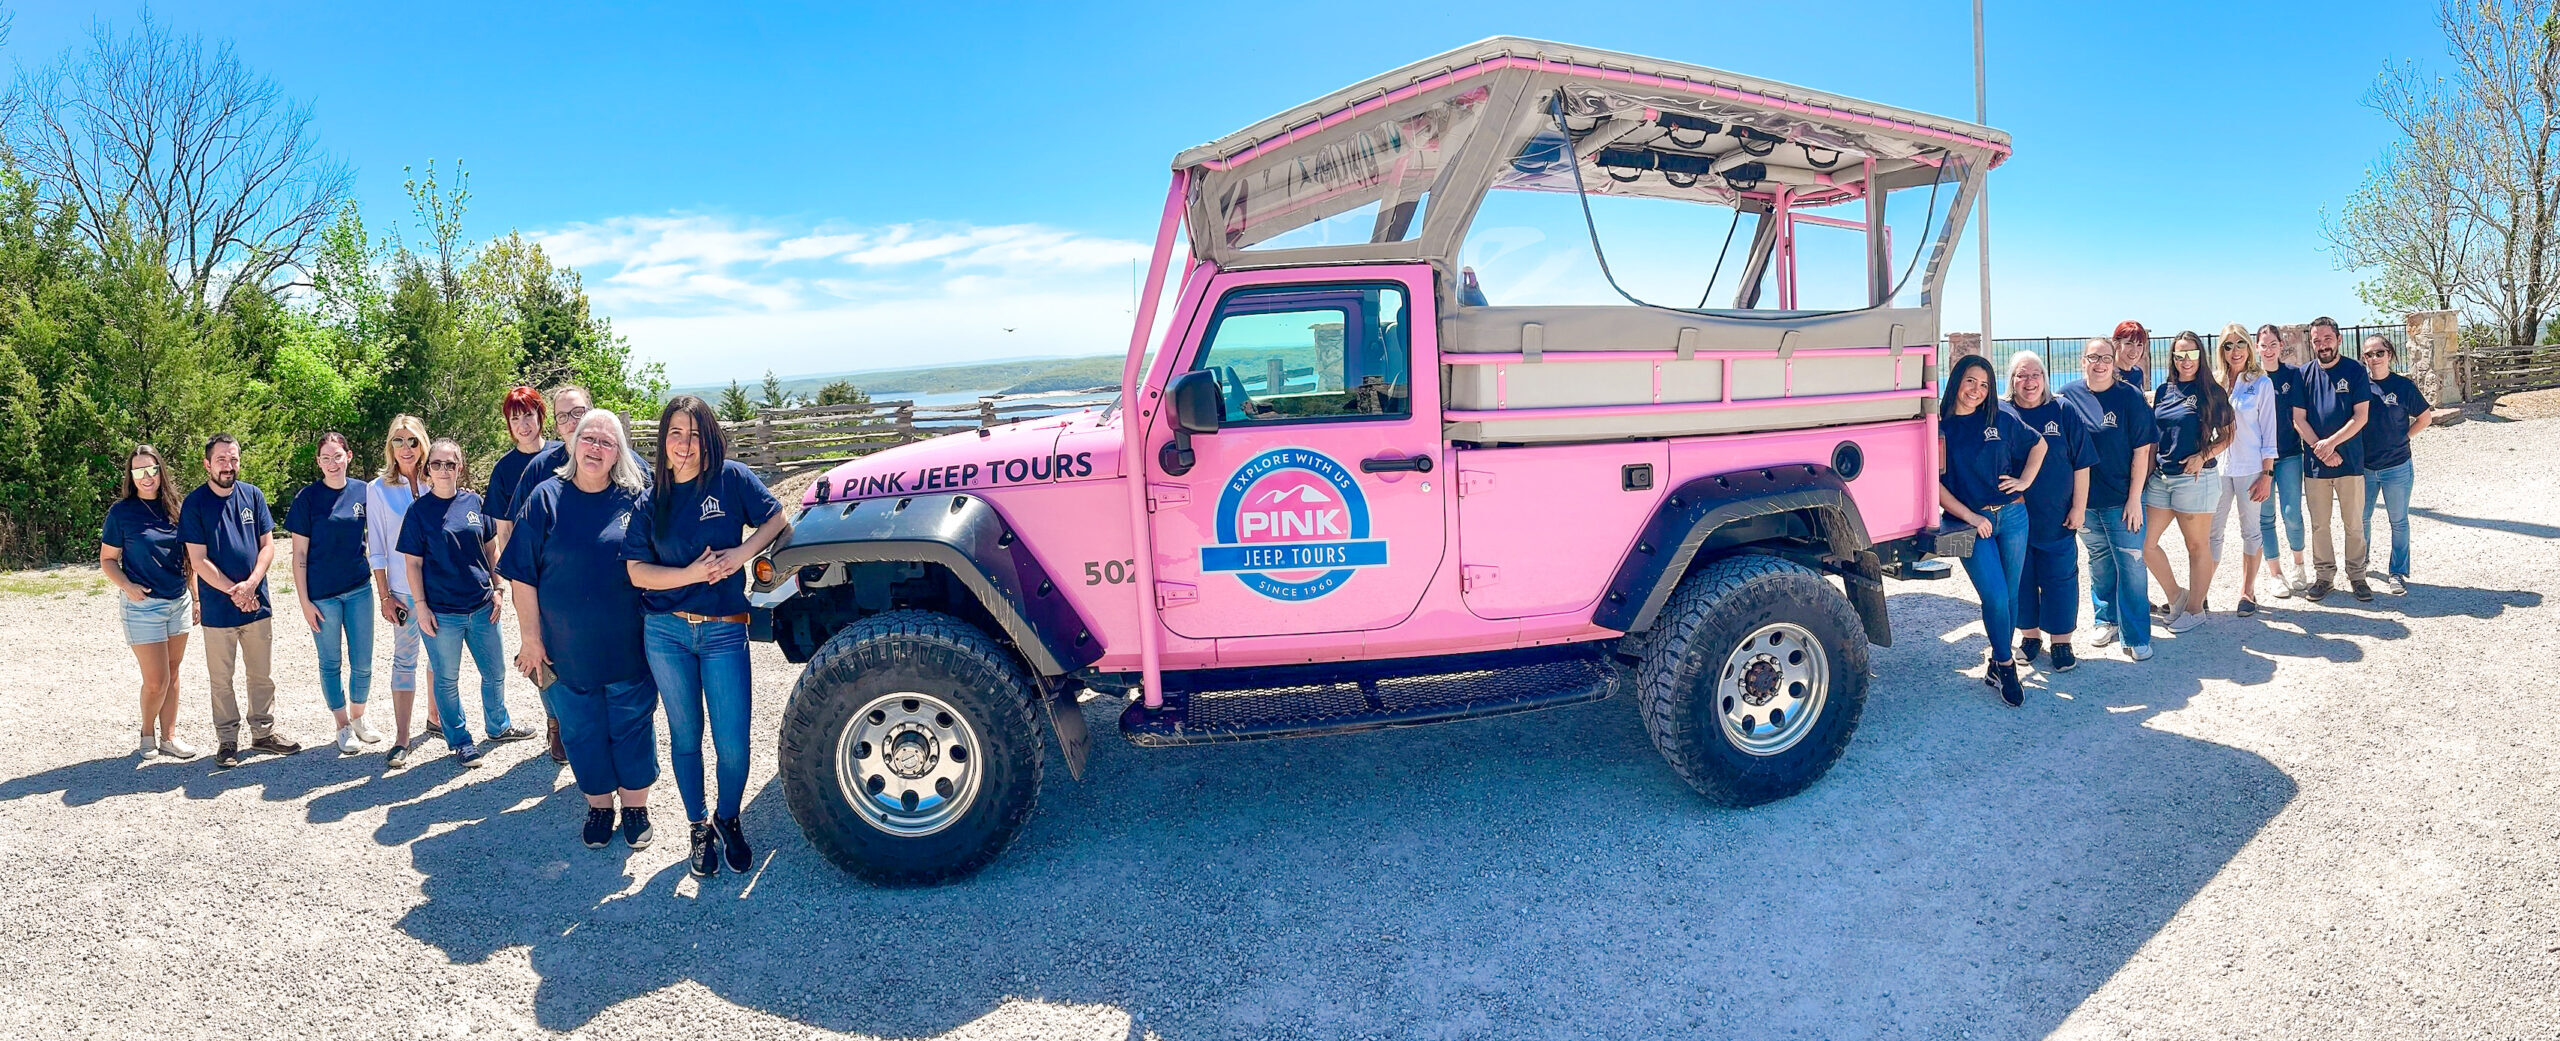 Is the Pink Jeep Tour in Branson Worth It?